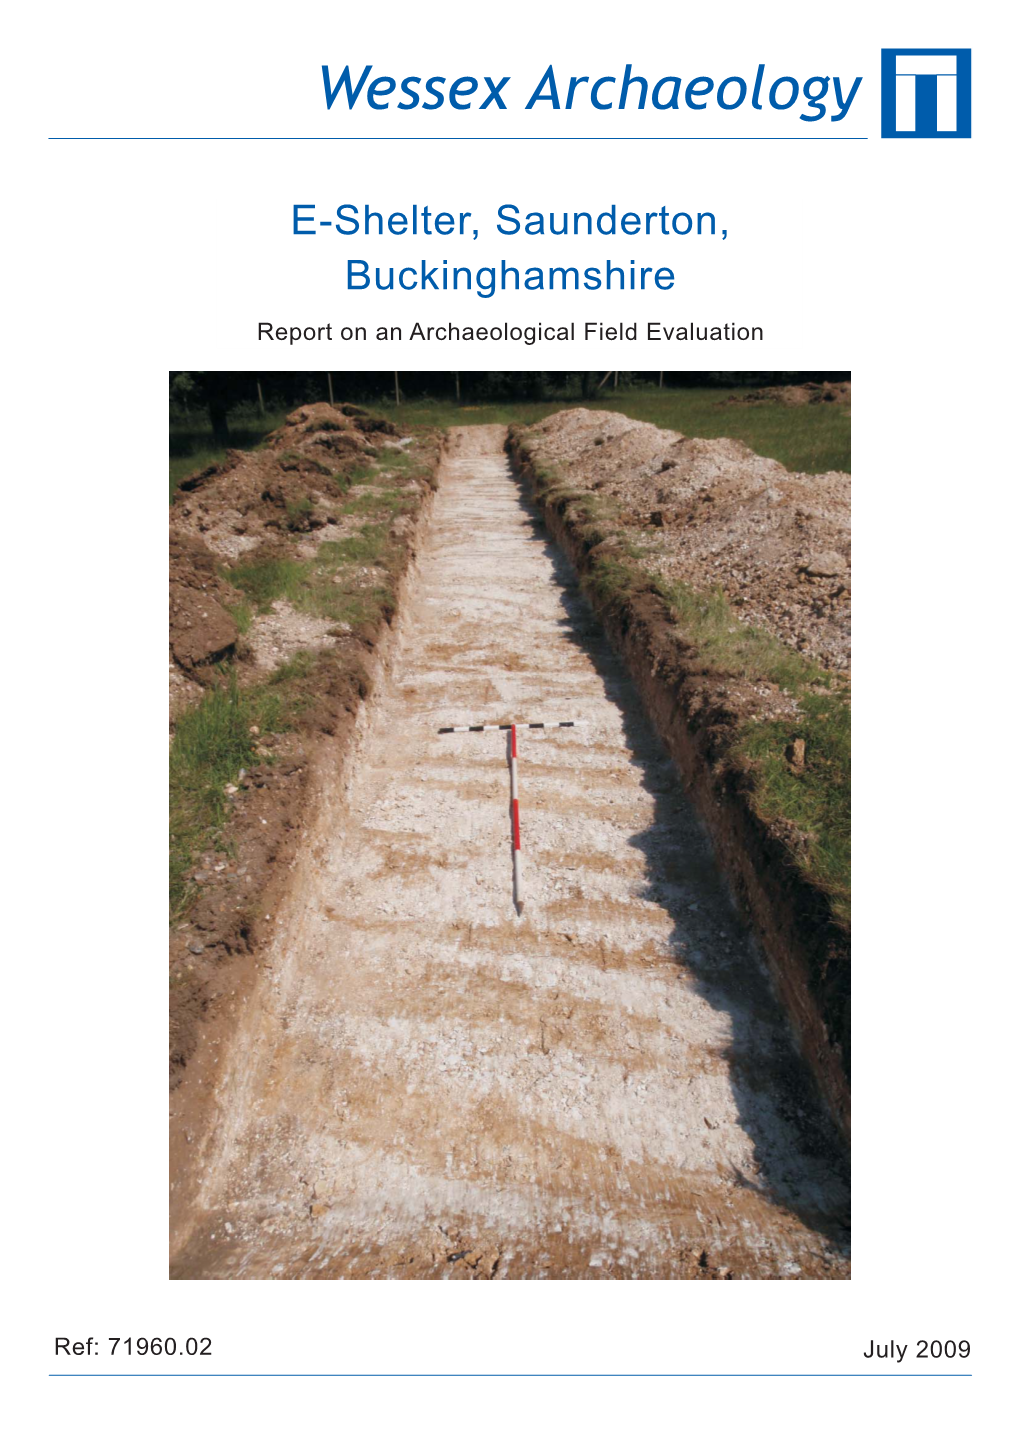 E-Shelter, Saunderton, Buckinghamshire Report on an Archaeological Field Evaluation